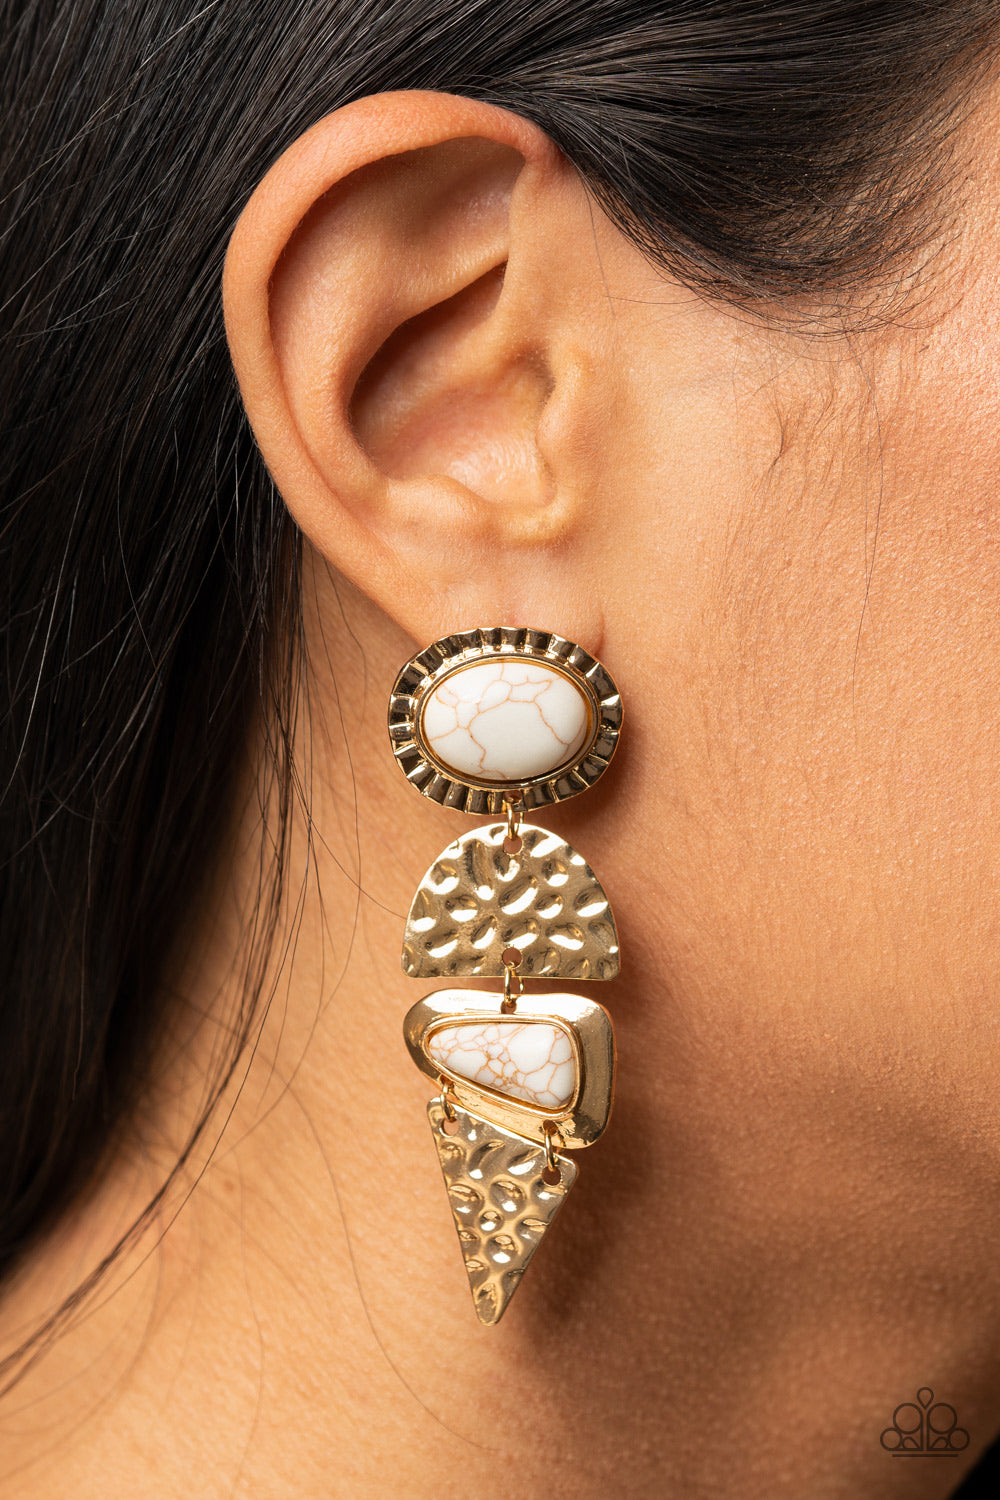 Earthy Extravagance Gold Post Earring - Paparazzi Accessories  Dotted with oval and triangular white stone accents, mismatched gold frames alternate with hammered geometric gold plates, creating an elegantly earthy lure. Earring attaches to a standard post fitting.  All Paparazzi Accessories are lead free and nickel free!   Sold as one pair of post earrings.